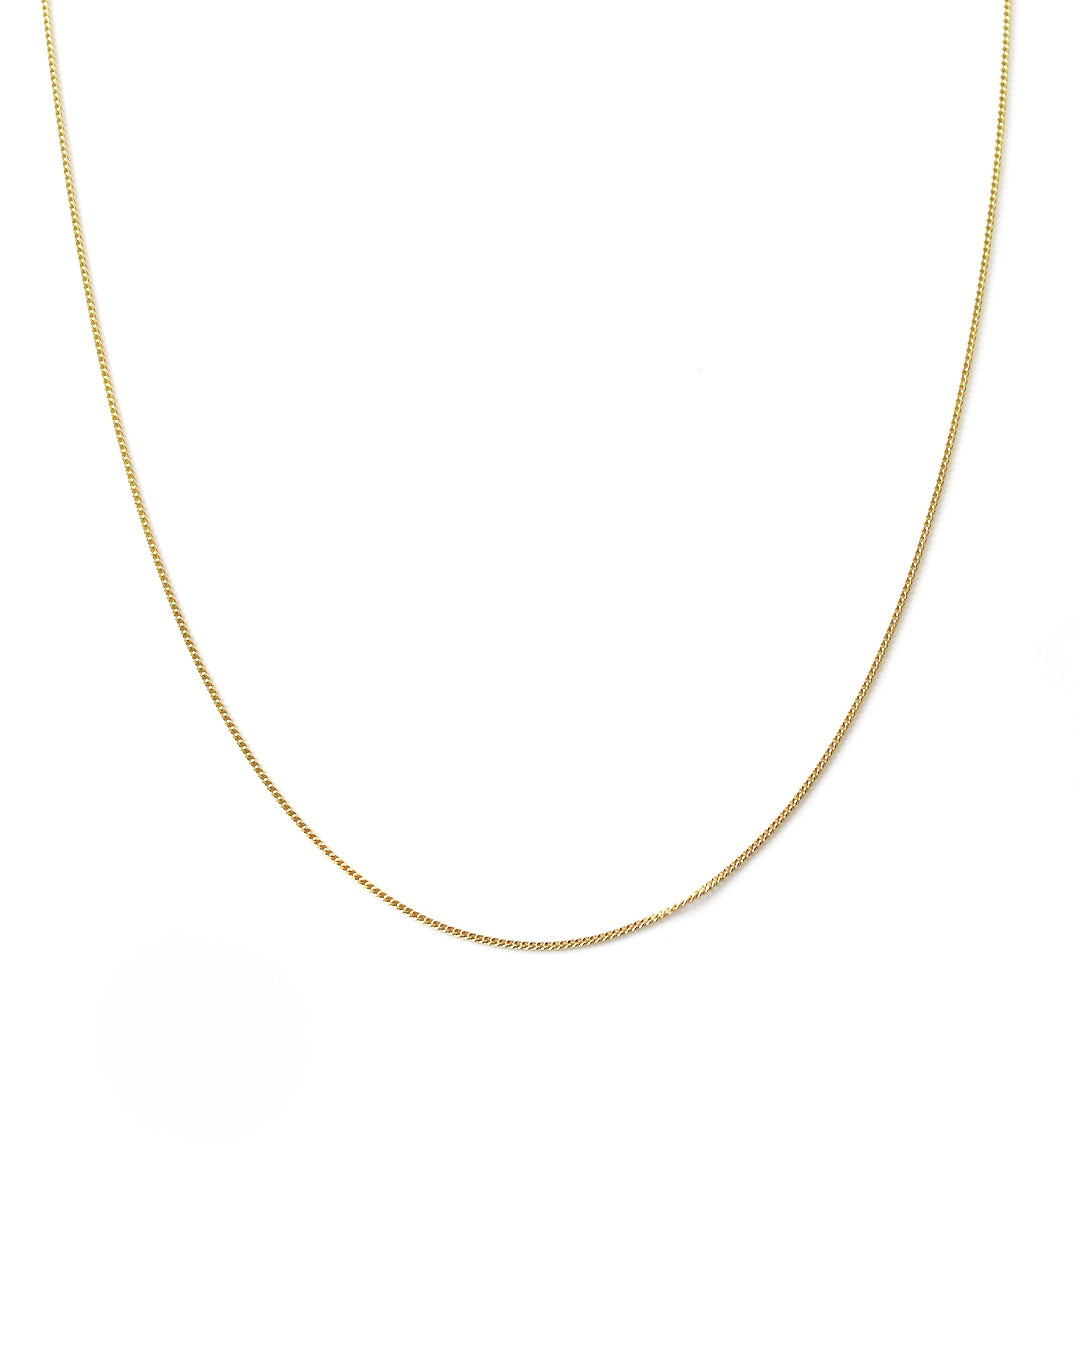 GOURMET NECKLACE - Solid gold